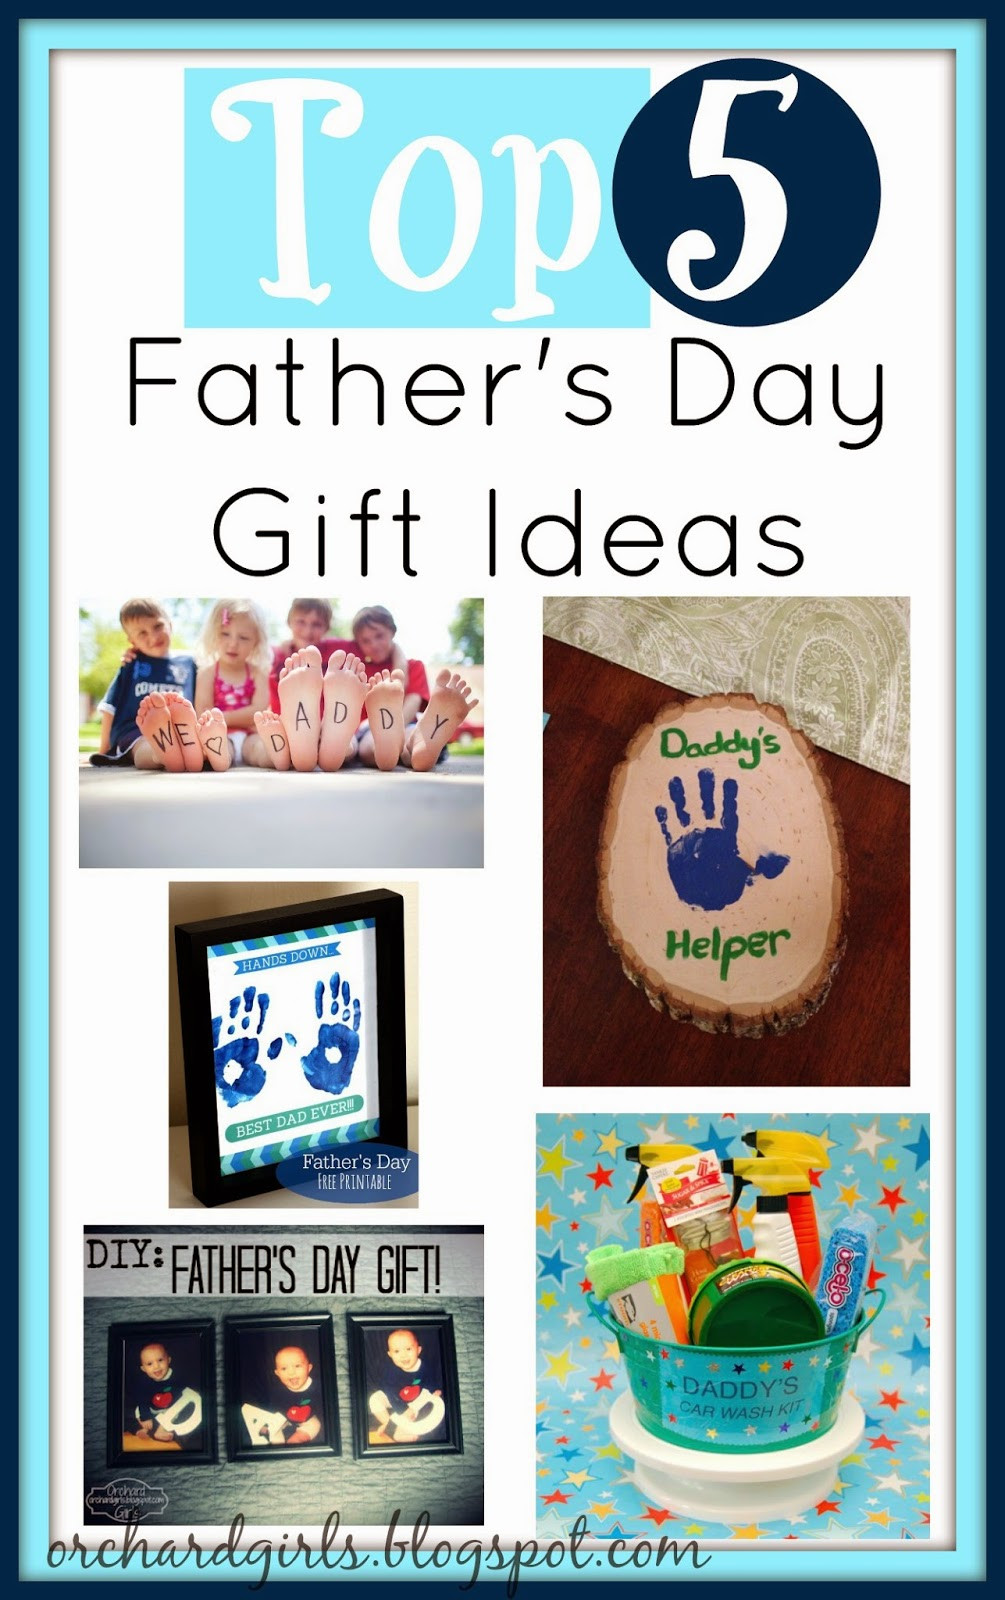 Fathers Day Gift Ideas From Kids
 Orchard Girls Top 5 Father s Day Gift Ideas from Kids